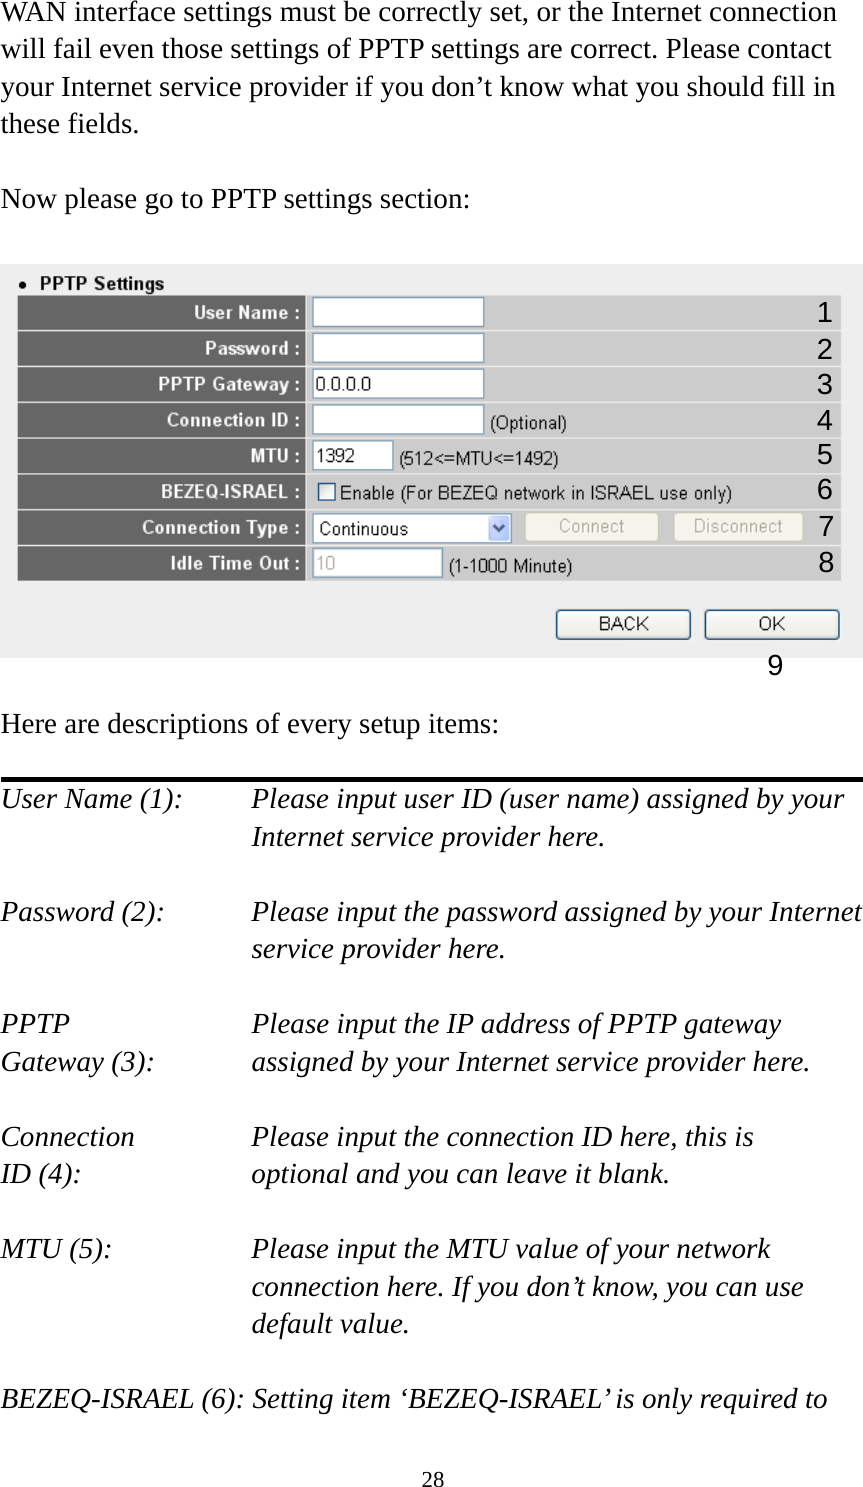 28 WAN interface settings must be correctly set, or the Internet connection will fail even those settings of PPTP settings are correct. Please contact your Internet service provider if you don’t know what you should fill in these fields.  Now please go to PPTP settings section:    Here are descriptions of every setup items:  User Name (1):    Please input user ID (user name) assigned by your Internet service provider here.  Password (2):    Please input the password assigned by your Internet service provider here.  PPTP    Please input the IP address of PPTP gateway Gateway (3):    assigned by your Internet service provider here.  Connection       Please input the connection ID here, this is ID (4):     optional and you can leave it blank.  MTU (5):    Please input the MTU value of your network connection here. If you don’t know, you can use default value.  BEZEQ-ISRAEL (6): Setting item ‘BEZEQ-ISRAEL’ is only required to 1 23 4 5 6 7 9 8 